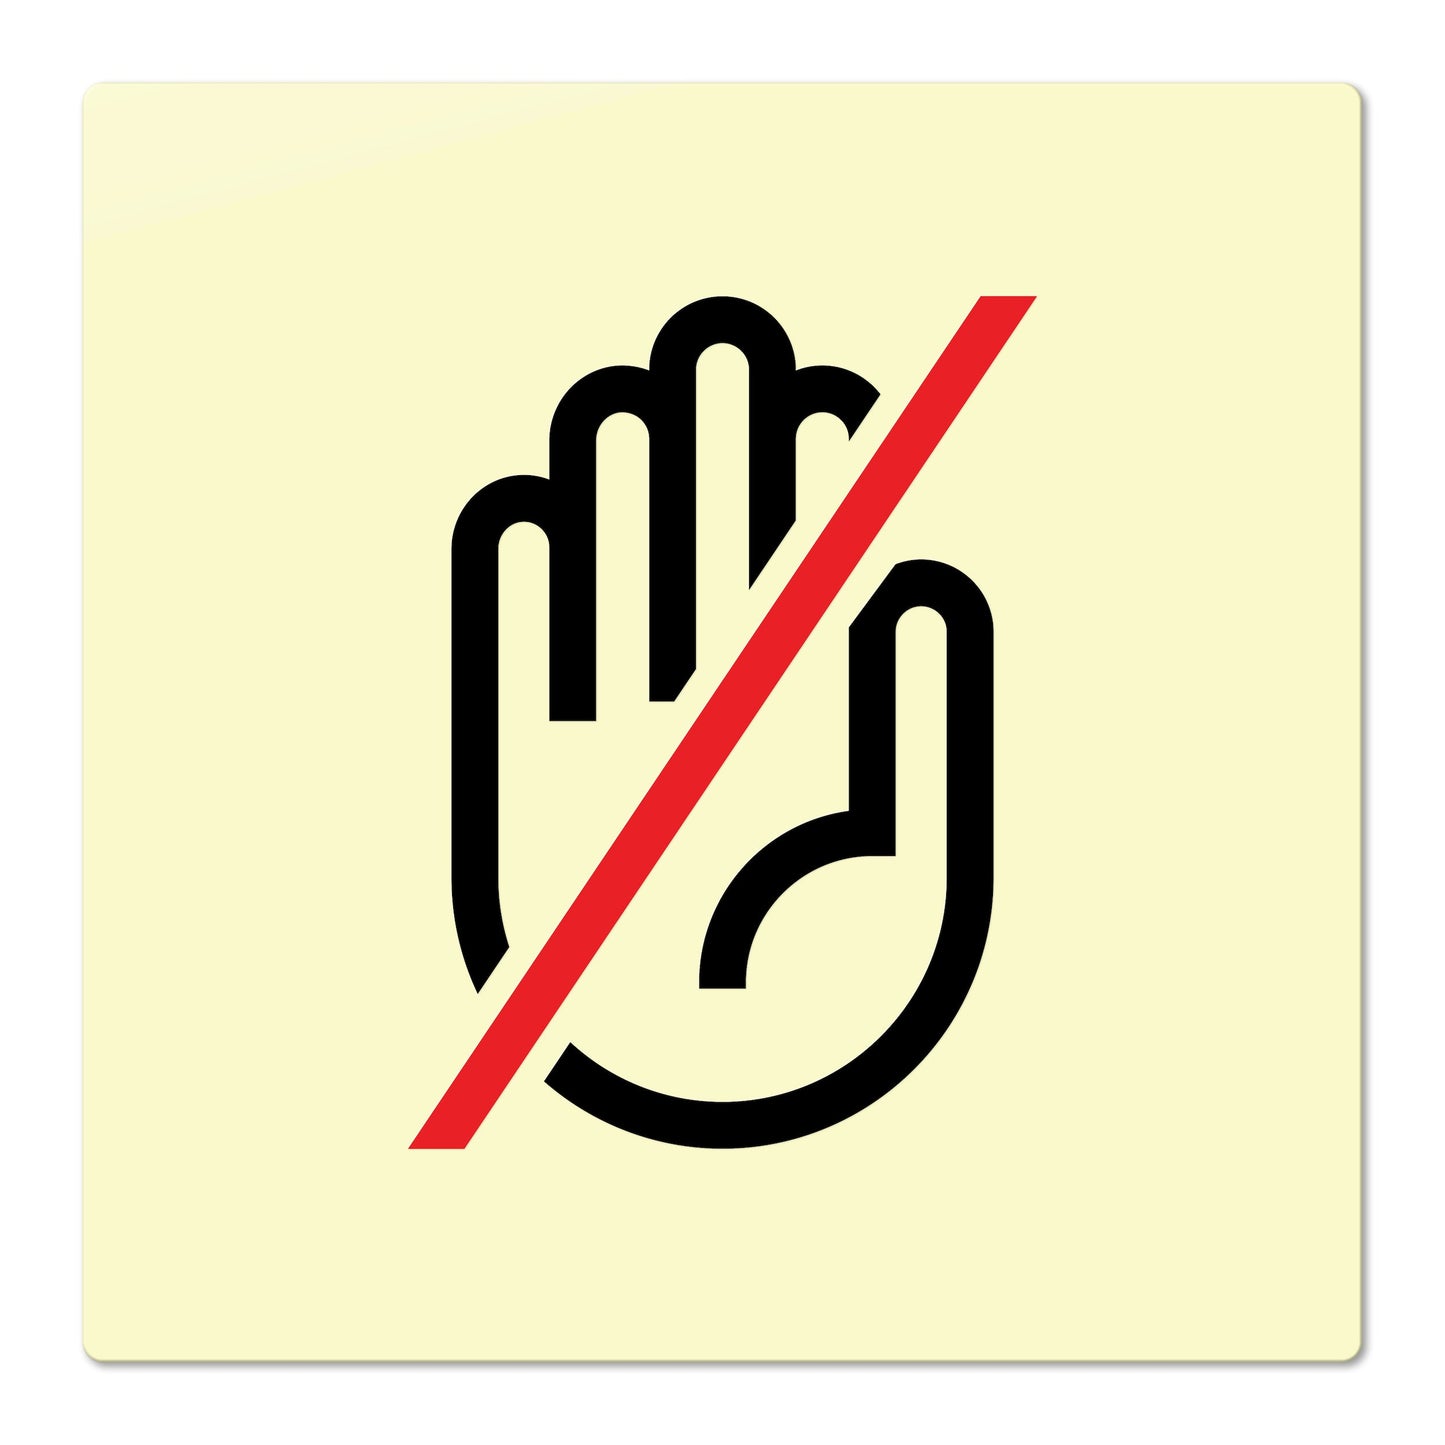 Do Not Touch (Pictogram)